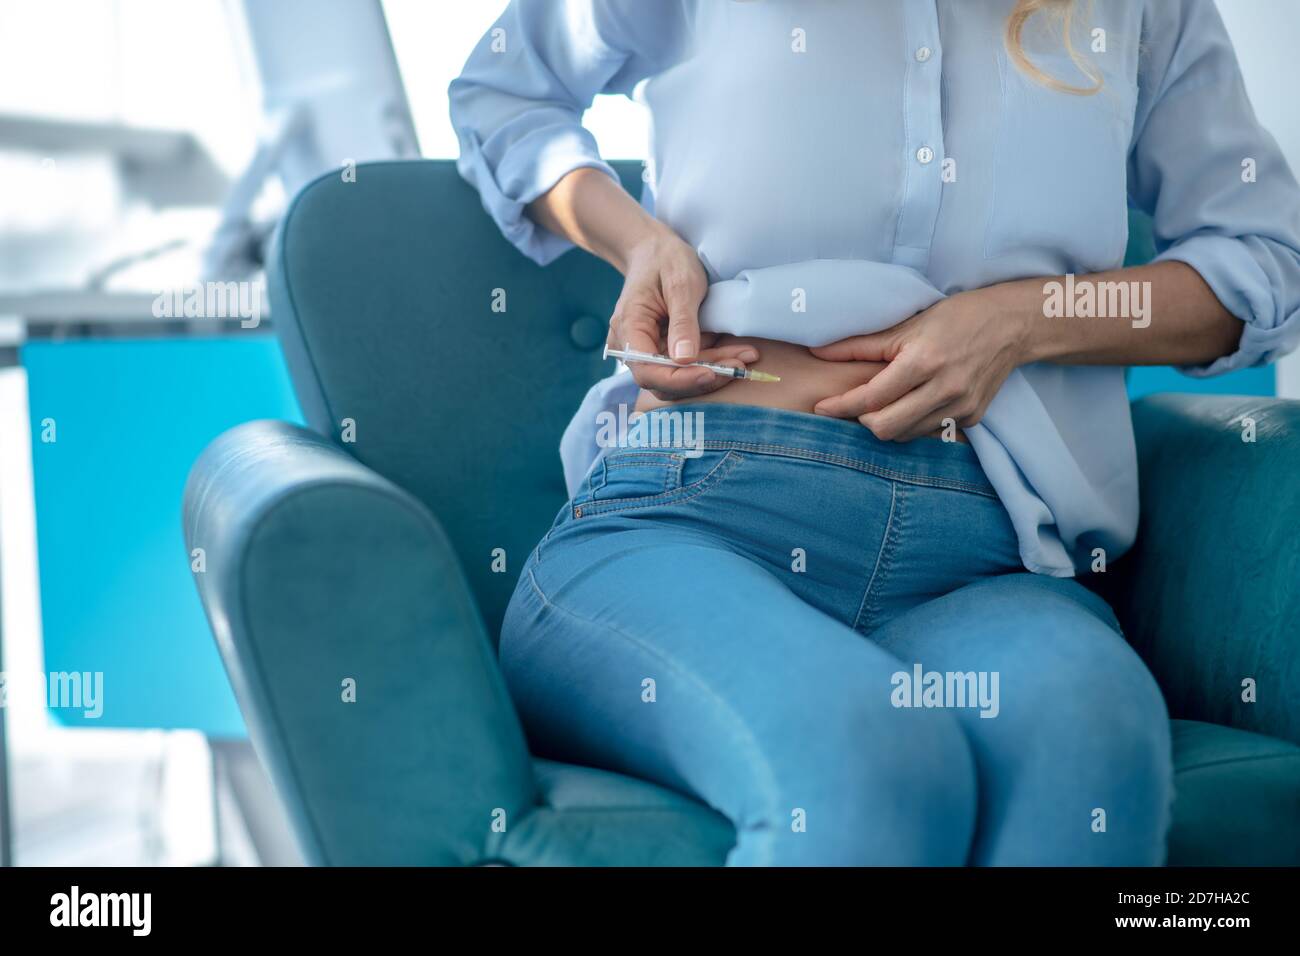 Close-up of female hands injecting insulin into abdomen Stock Photo